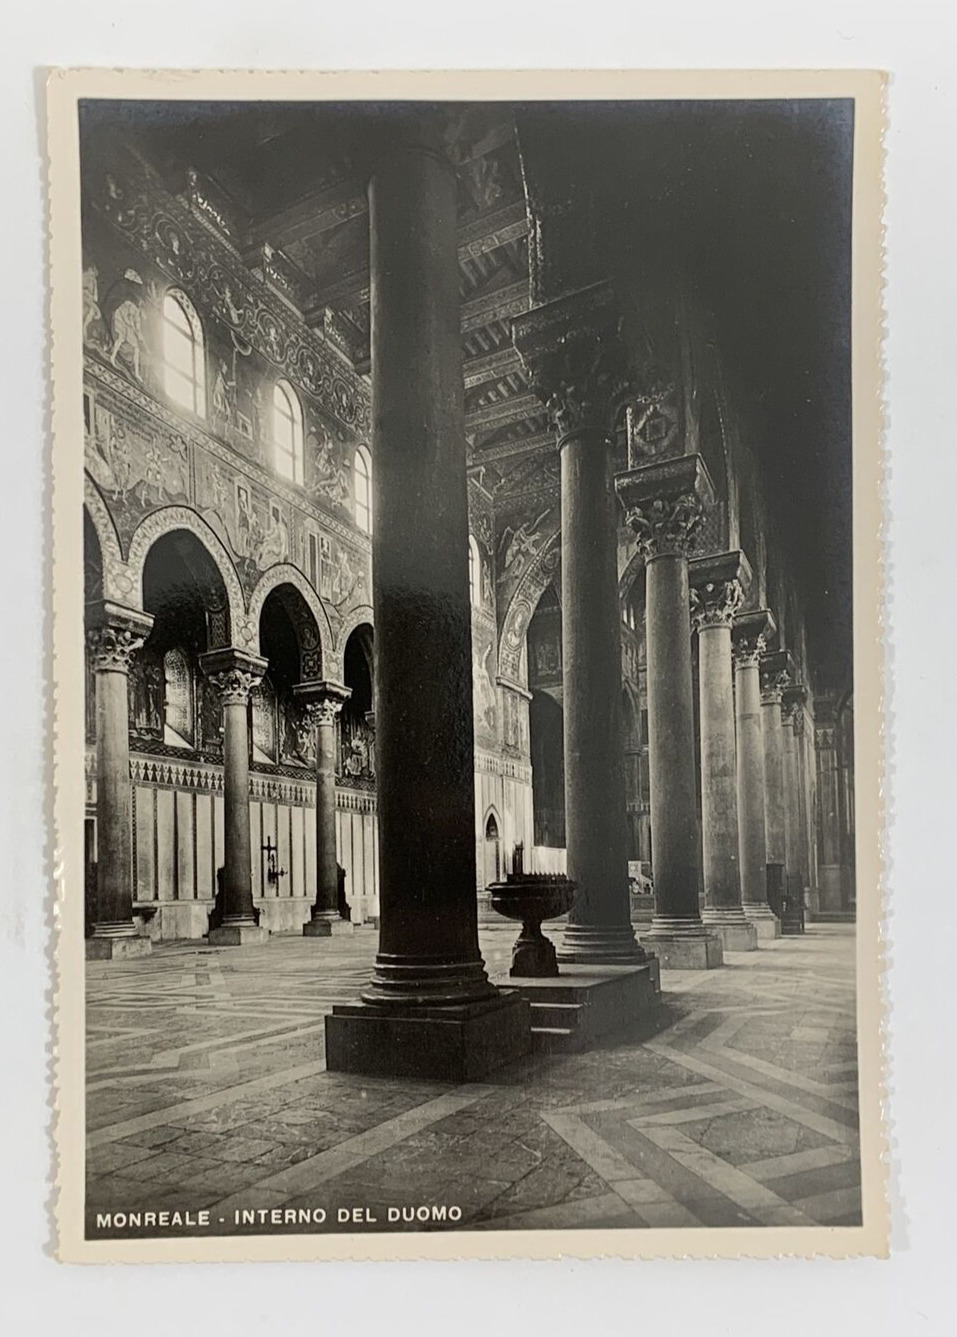 RPPC Interior of the Cathedral Monreale Duomo Italy Real Photo Postcard